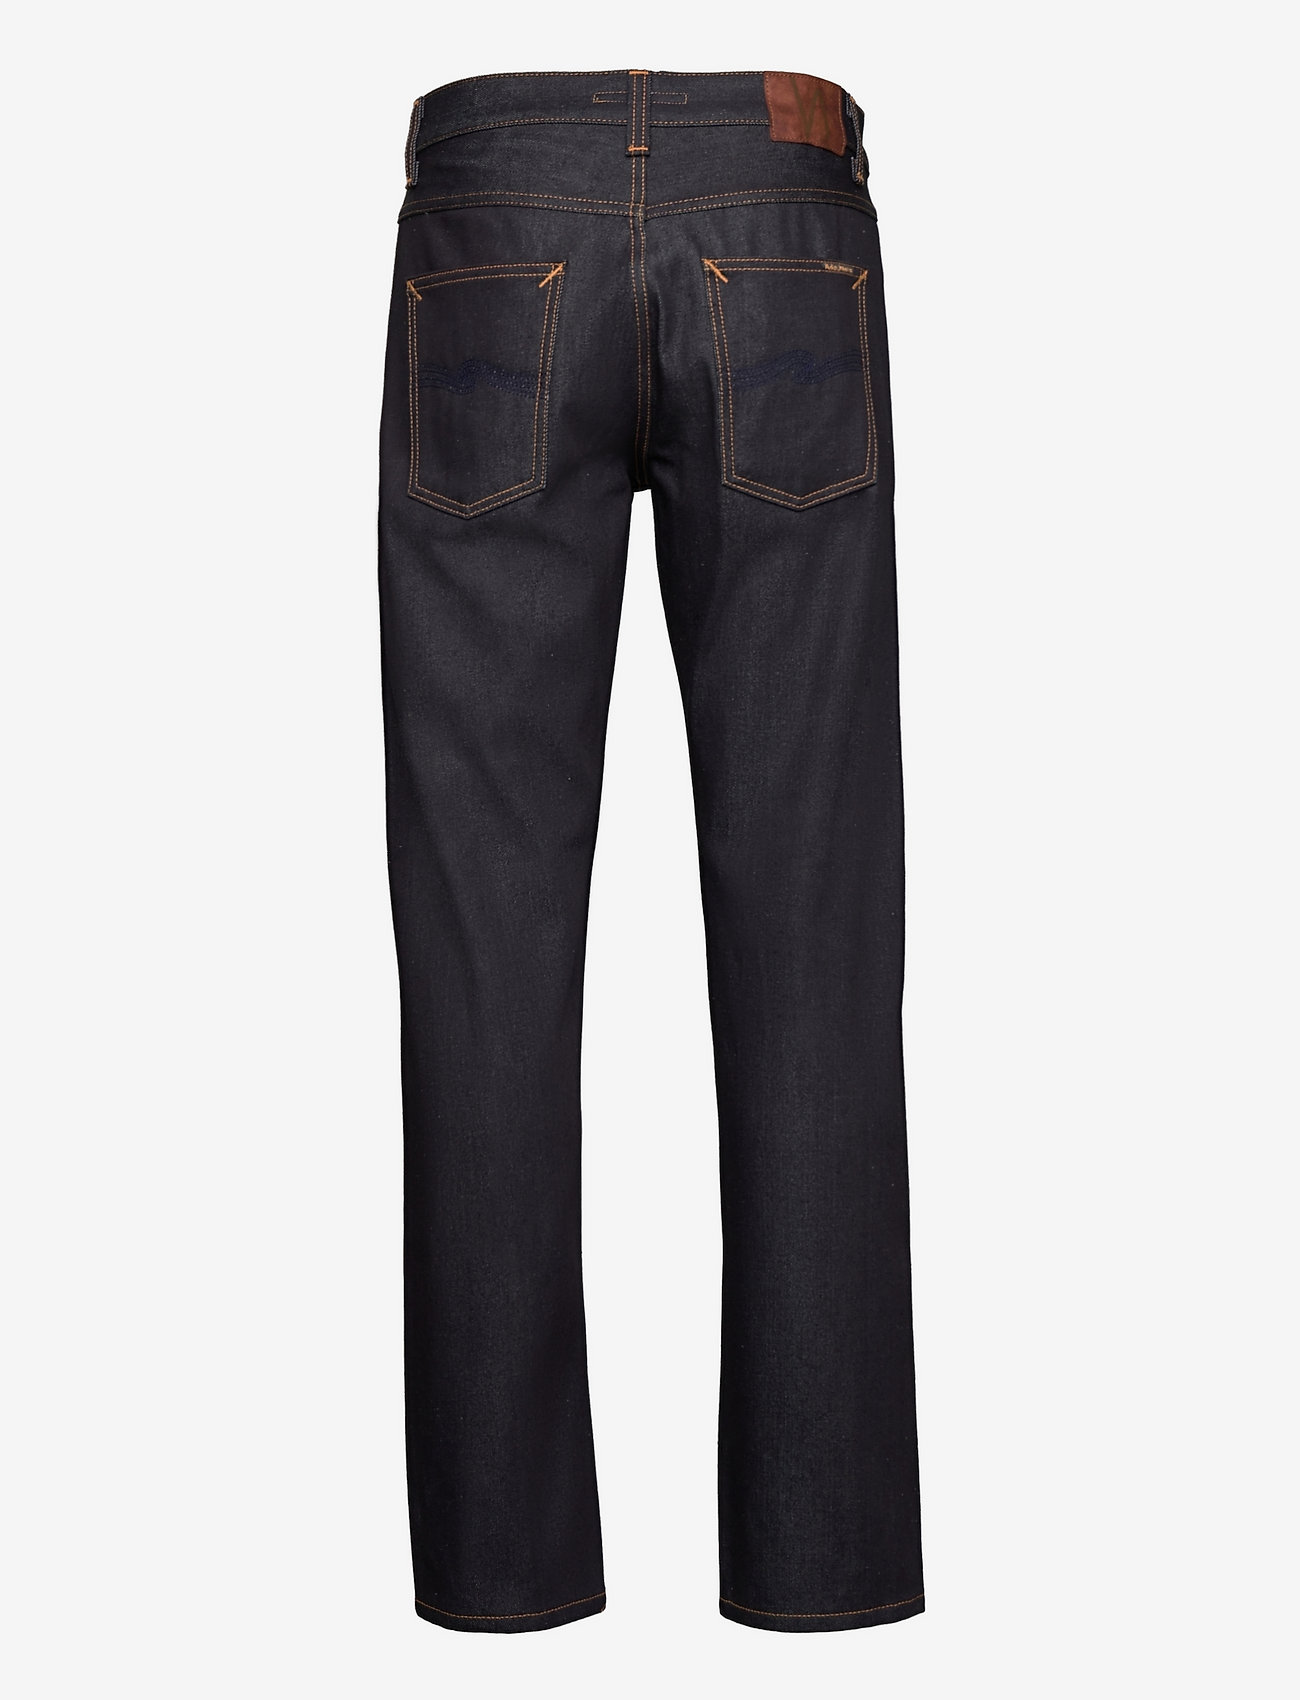 Nudie Jeans - Gritty Jackson - regular jeans - dry maze selvag - 2